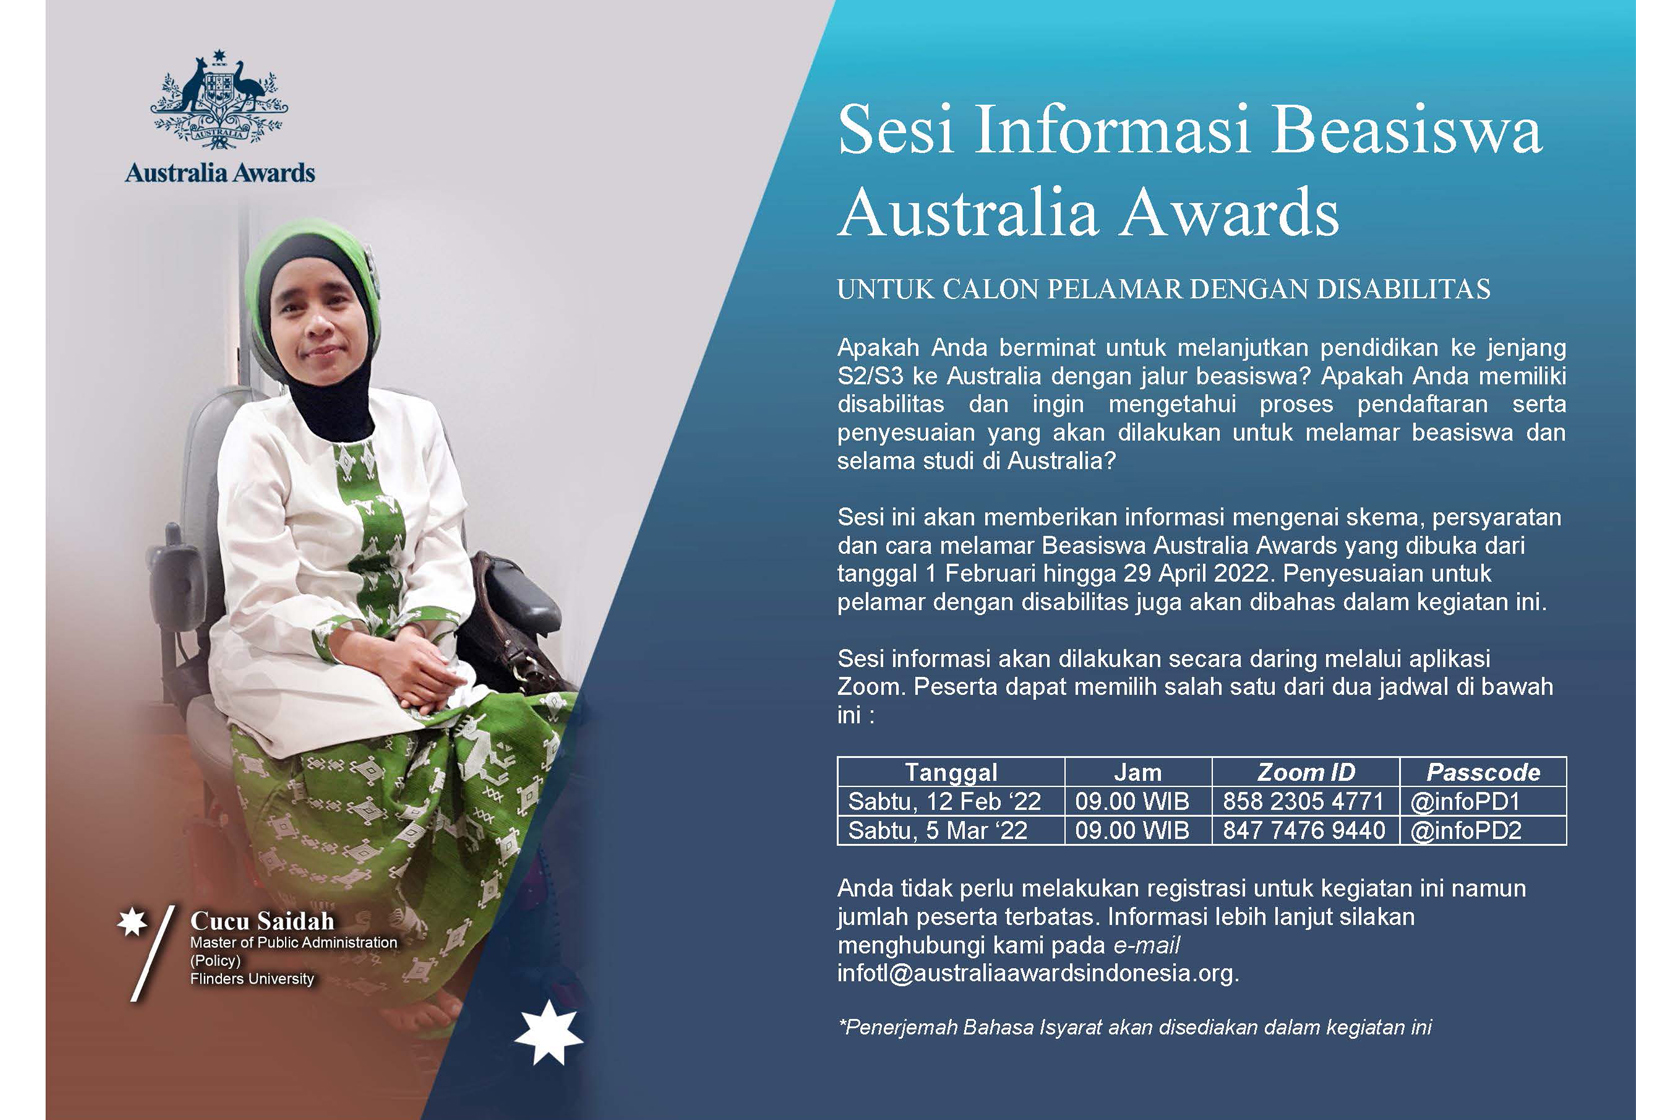 Australia Award Scholarships Information Sessions for Prospective Applicants with Disabilities